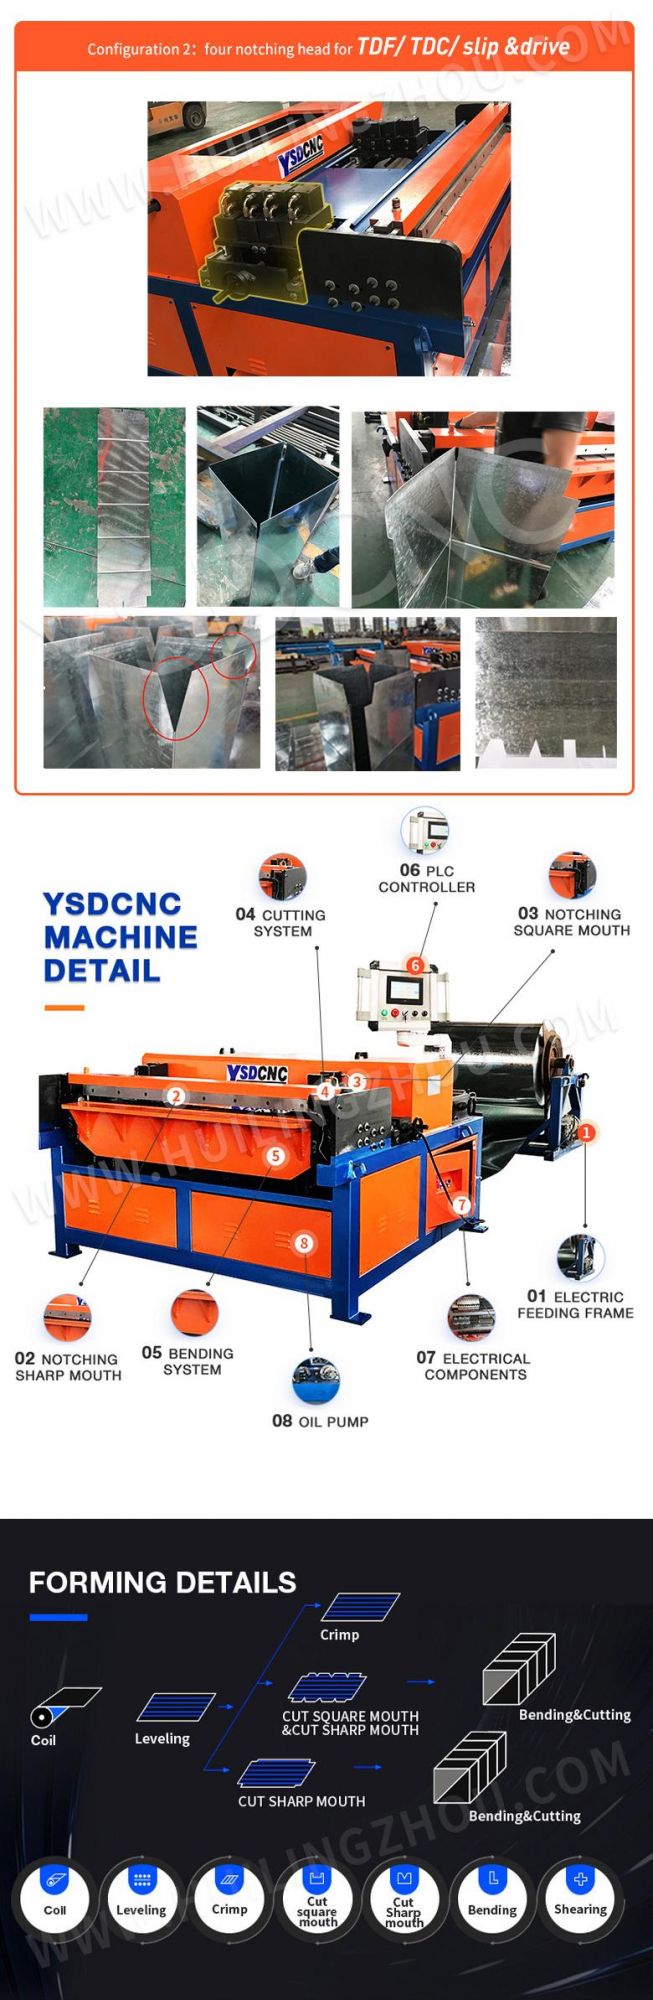 Air Conditioning Auto Duct Line HVAC Duct Forming Machine Auto Duct Line 3, Rectangular Air Pipe Forming Line